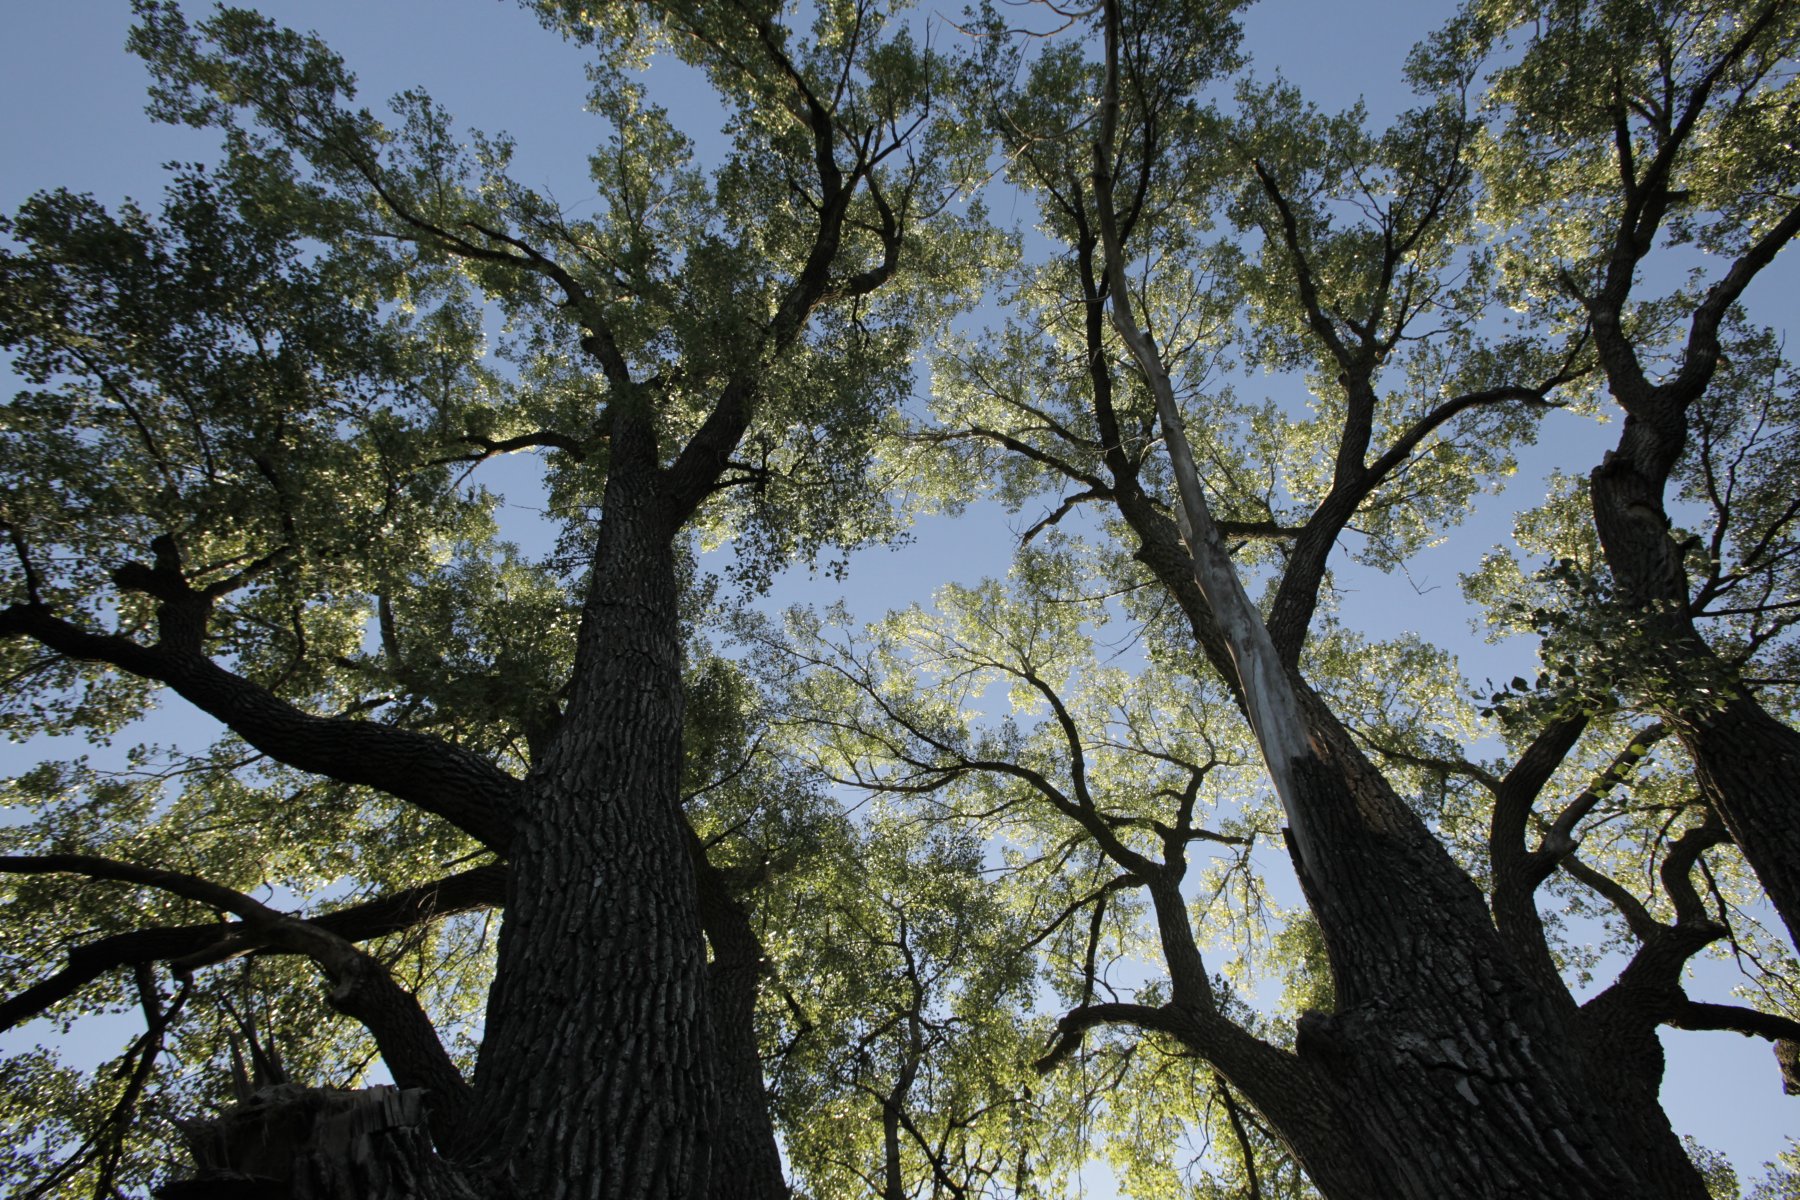 Looking up at a large cottonwood tree.